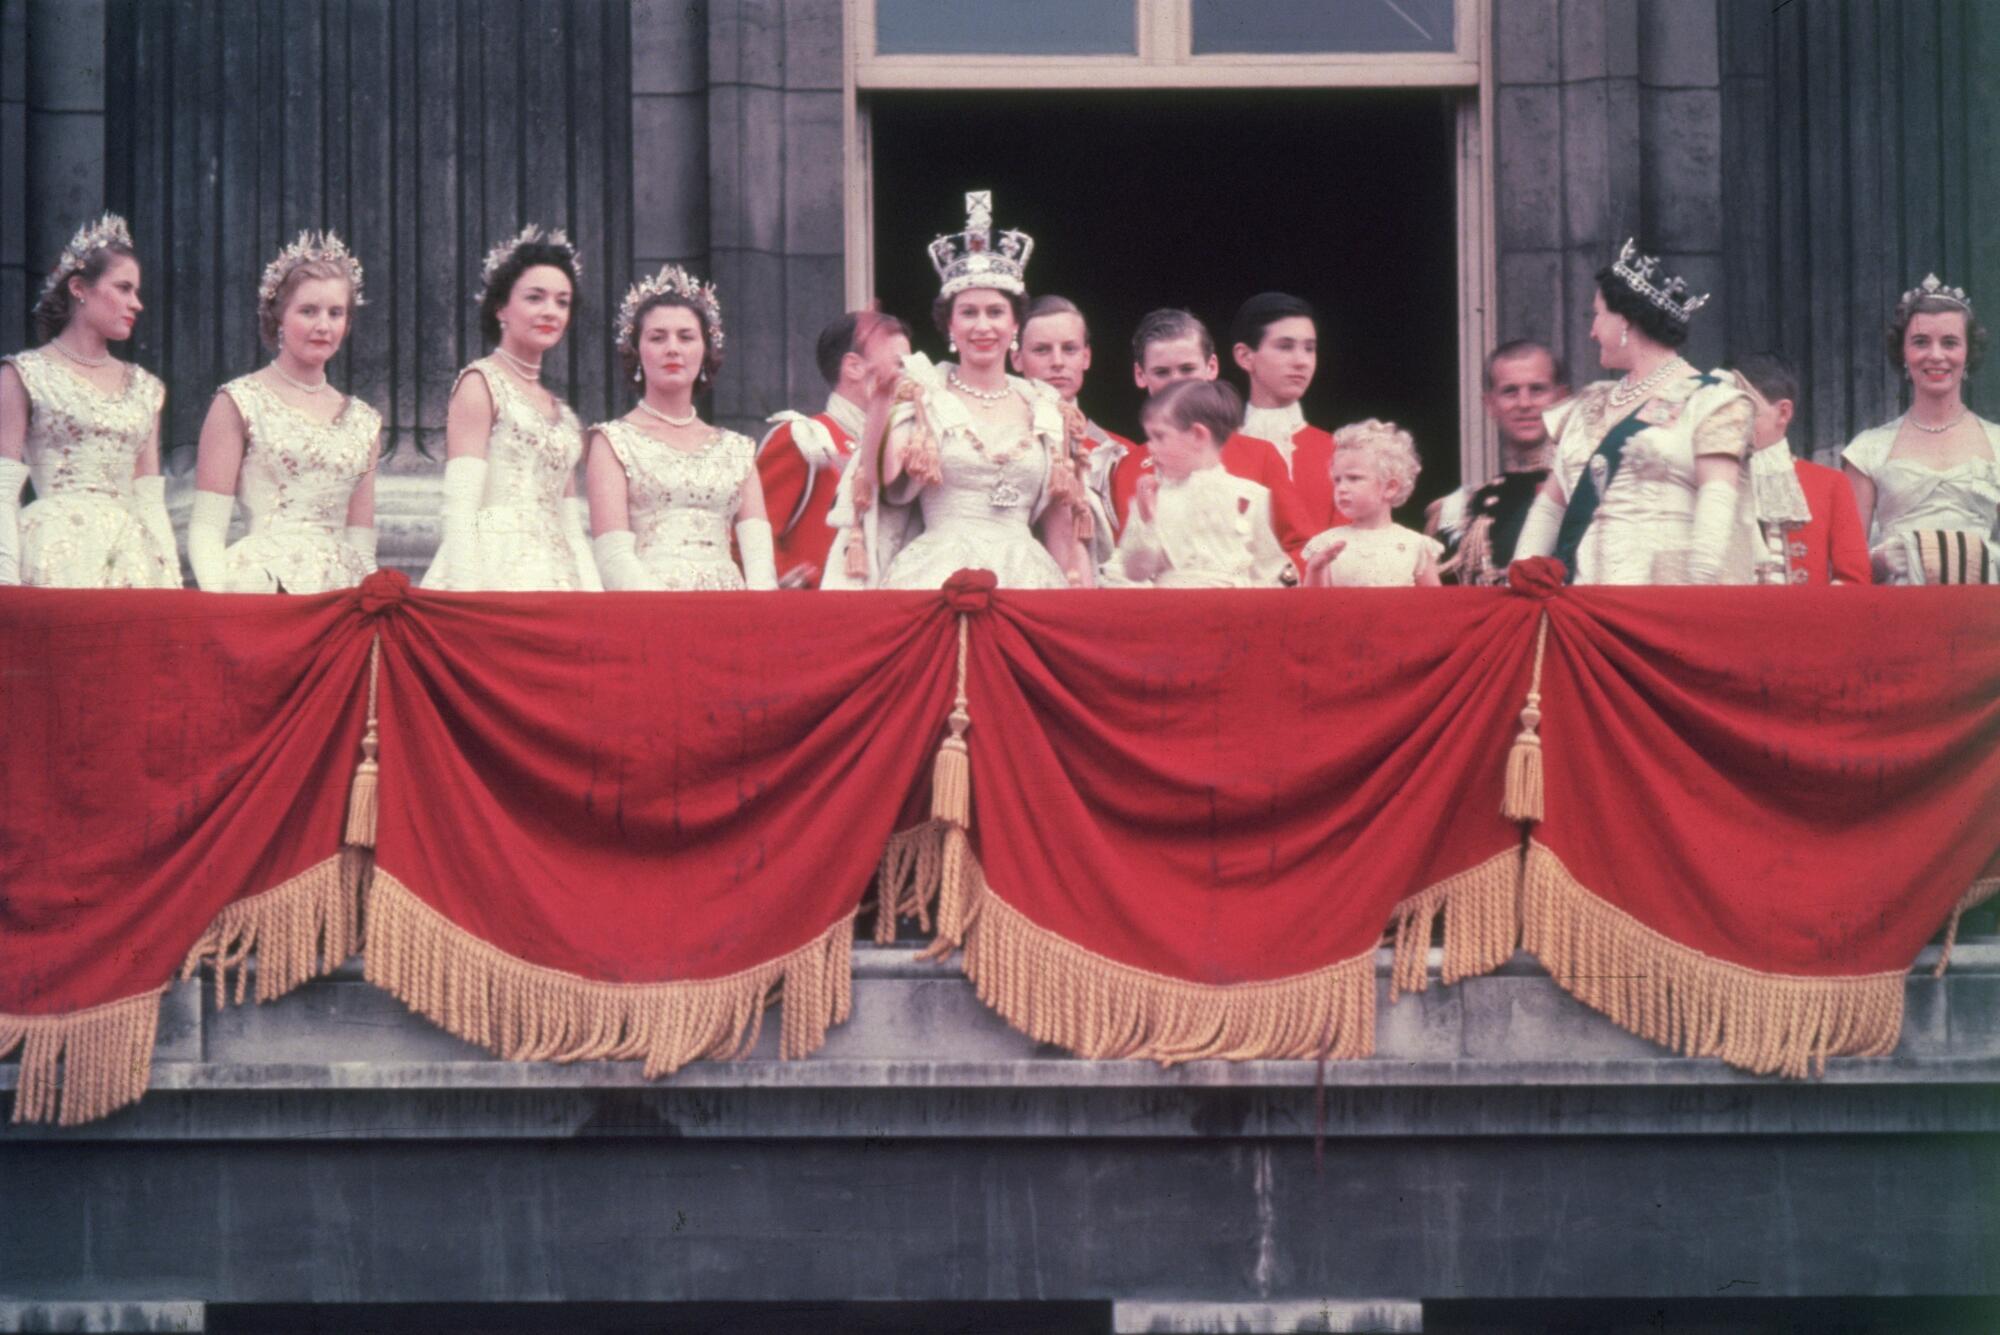 The newly crowned Queen Elizabeth II waves to the crowd from a balcony while several people stand behind her in formal wear. 